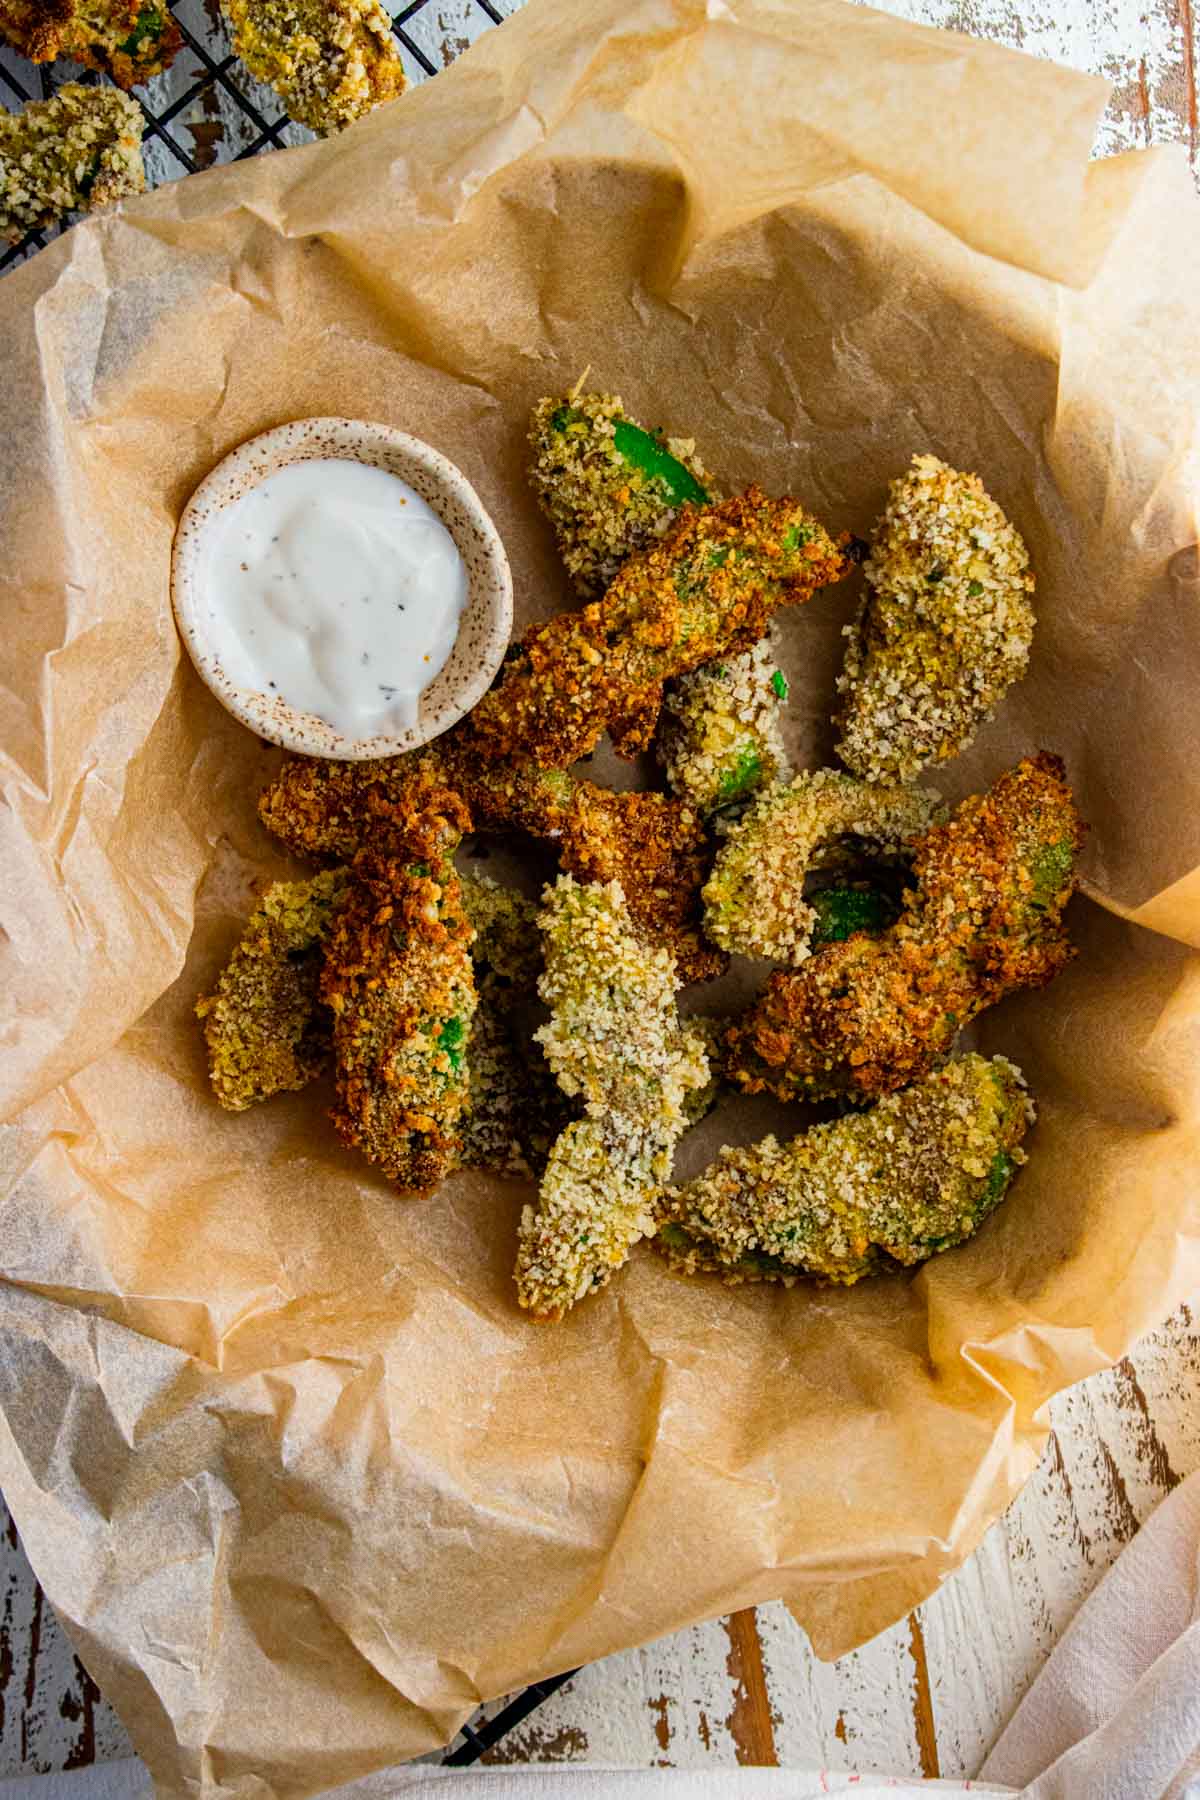 A birds-eye view of avocado fries in a bowl with parchment paper and a dipping sauce.